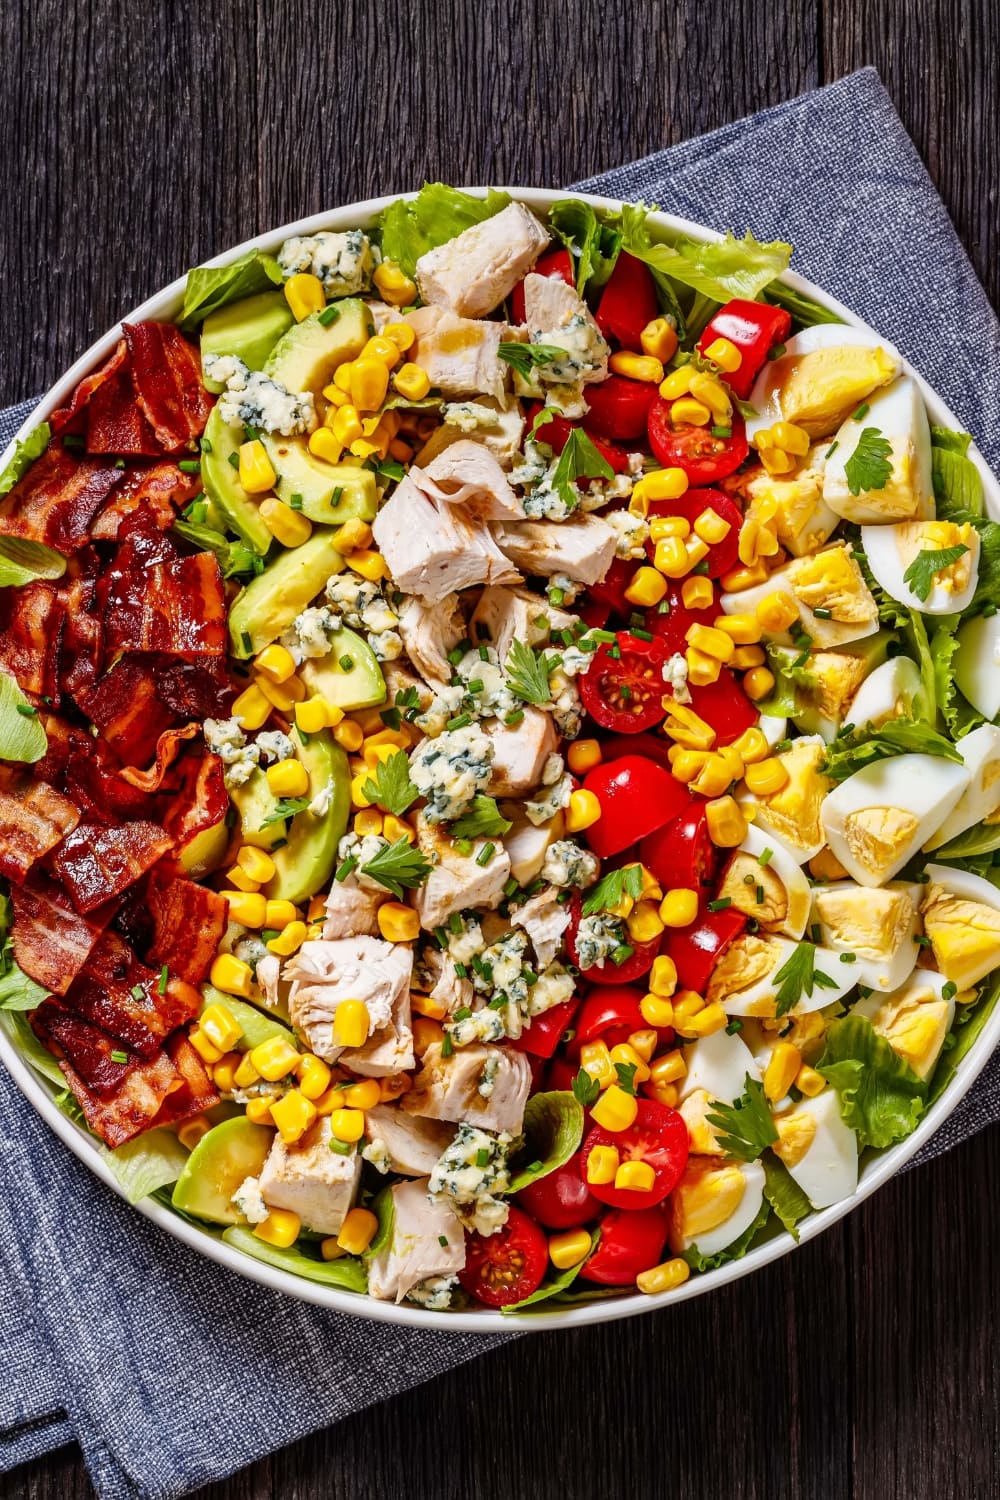 American Salad with Chicken, Corn, Sliced Egg, Tomatoes and Bacon